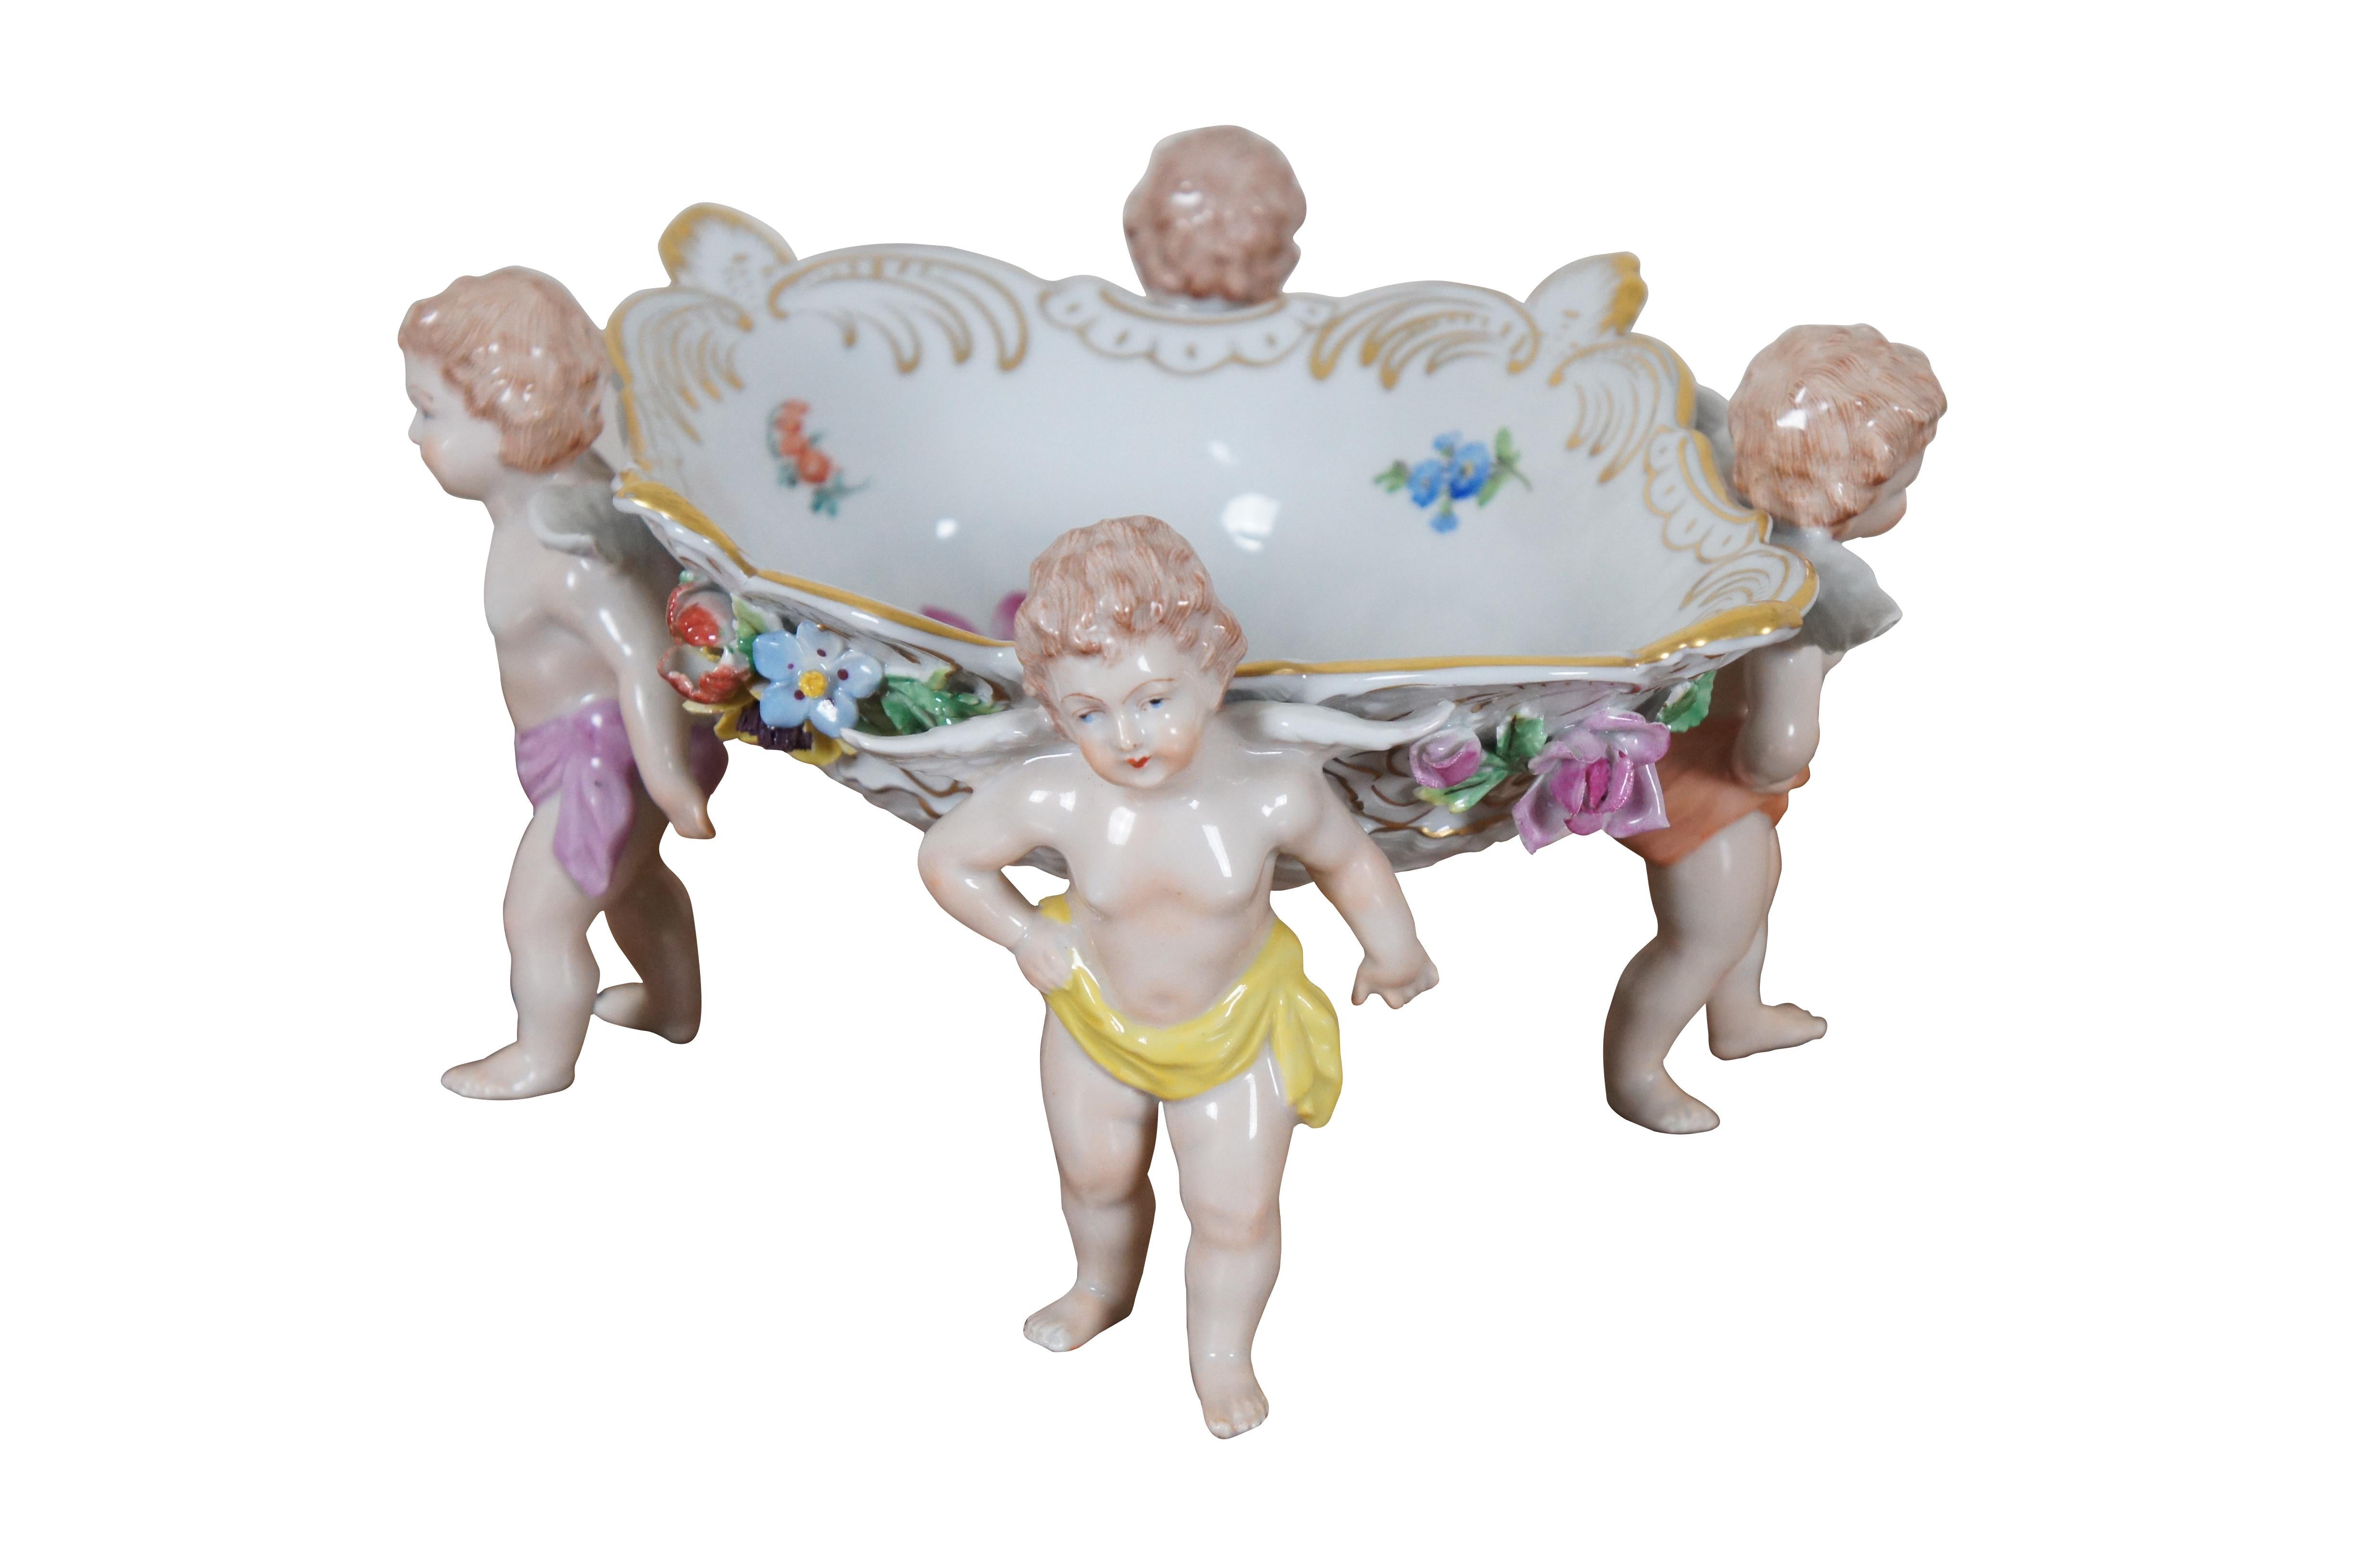 An exceptional Carl Thieme for Dresden Polychrome Centerpiece. Made from porcelain with colorful details.  The bowl has a diamond form with flowers and gold trim. Supported by four cherubs / Puttis.  

“The Sächsische Porzellan-Manufaktur Dresden